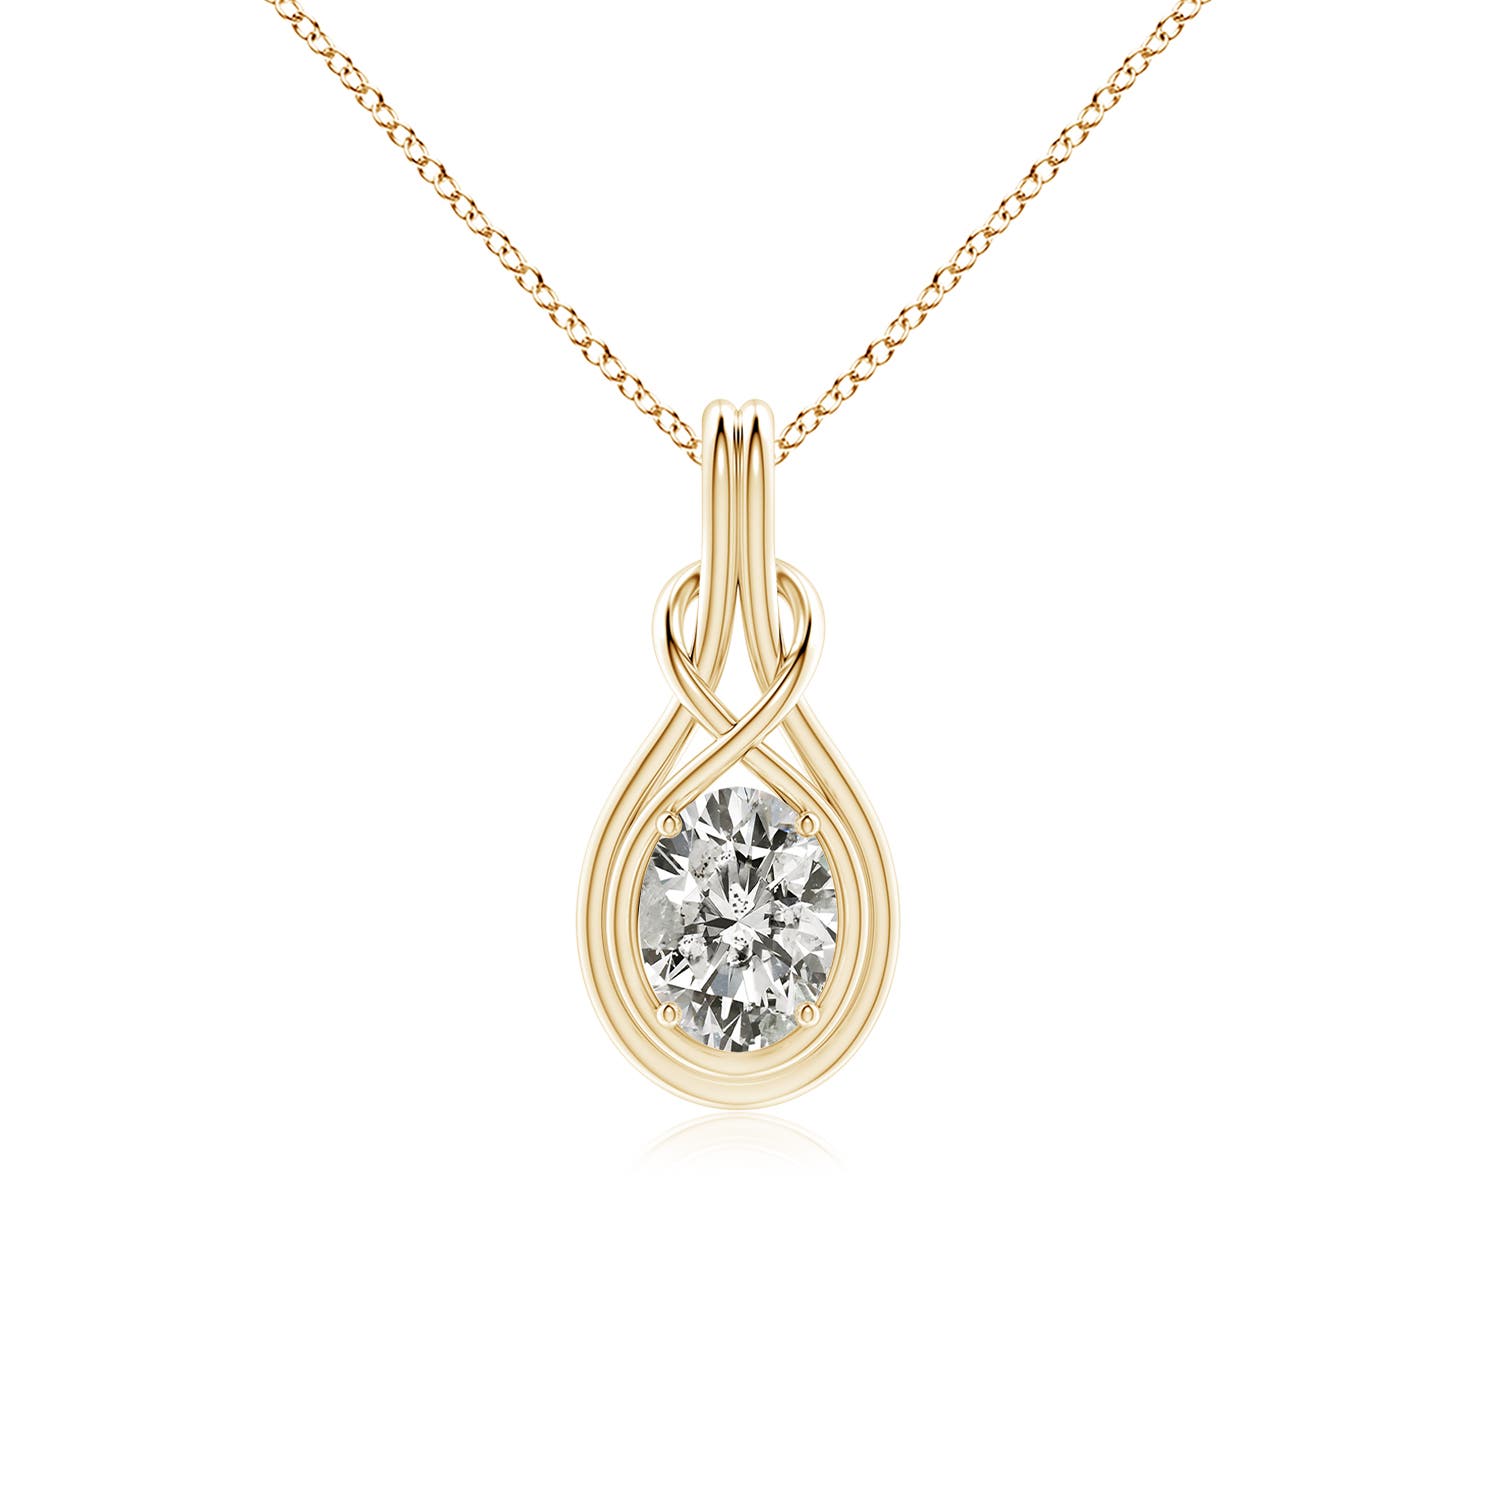 K, I3 / 1.5 CT / 18 KT Yellow Gold